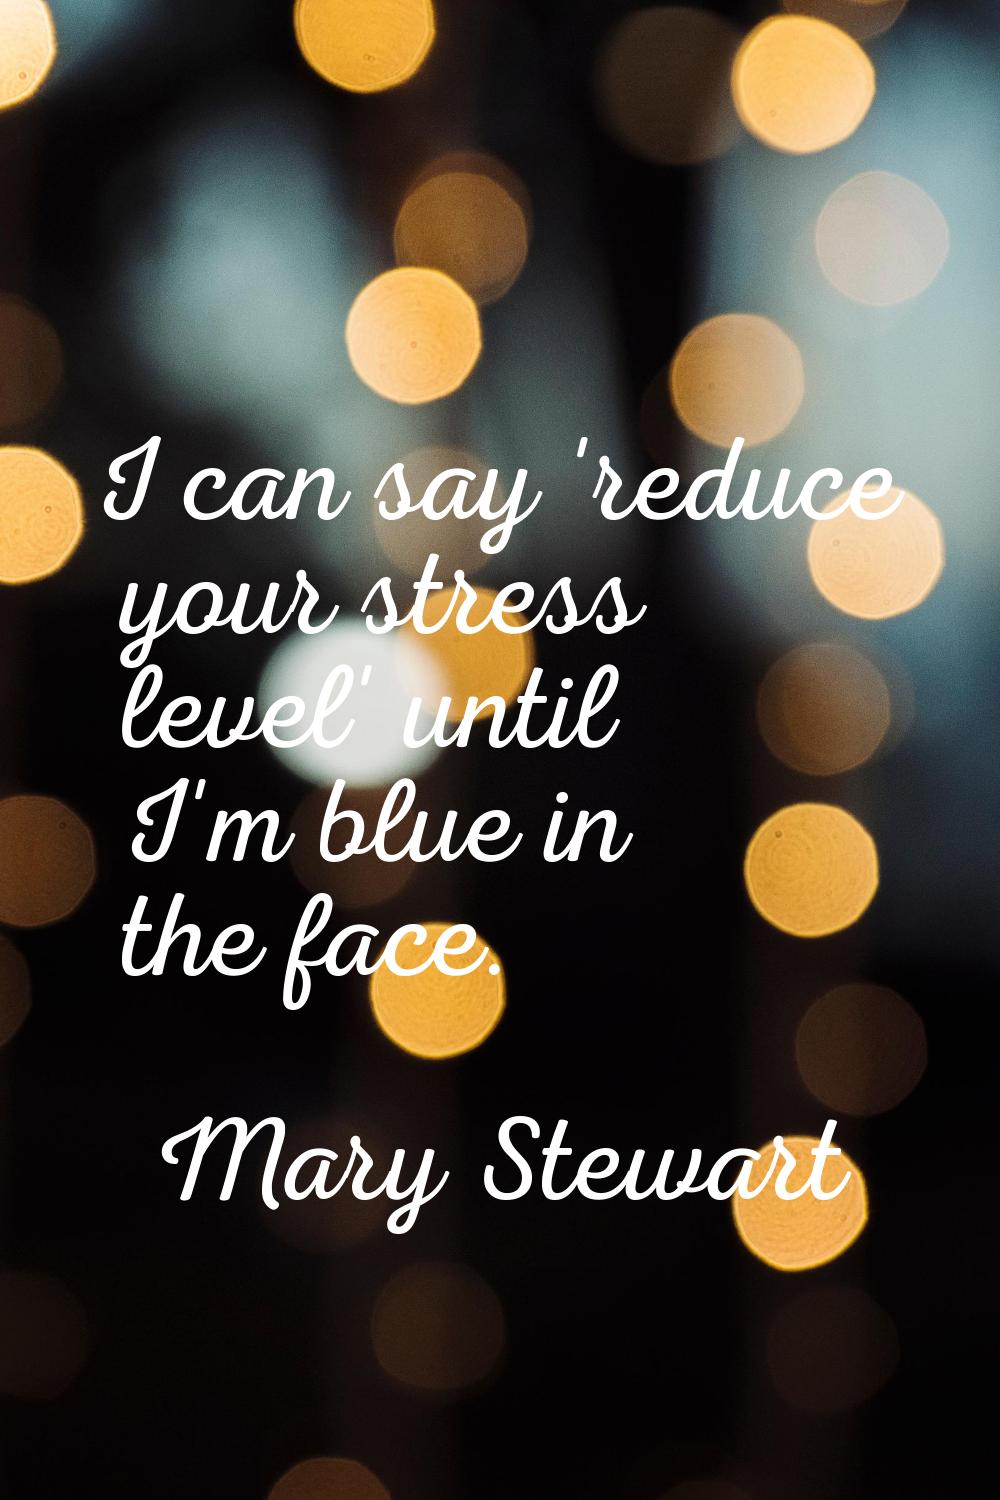 I can say 'reduce your stress level' until I'm blue in the face.